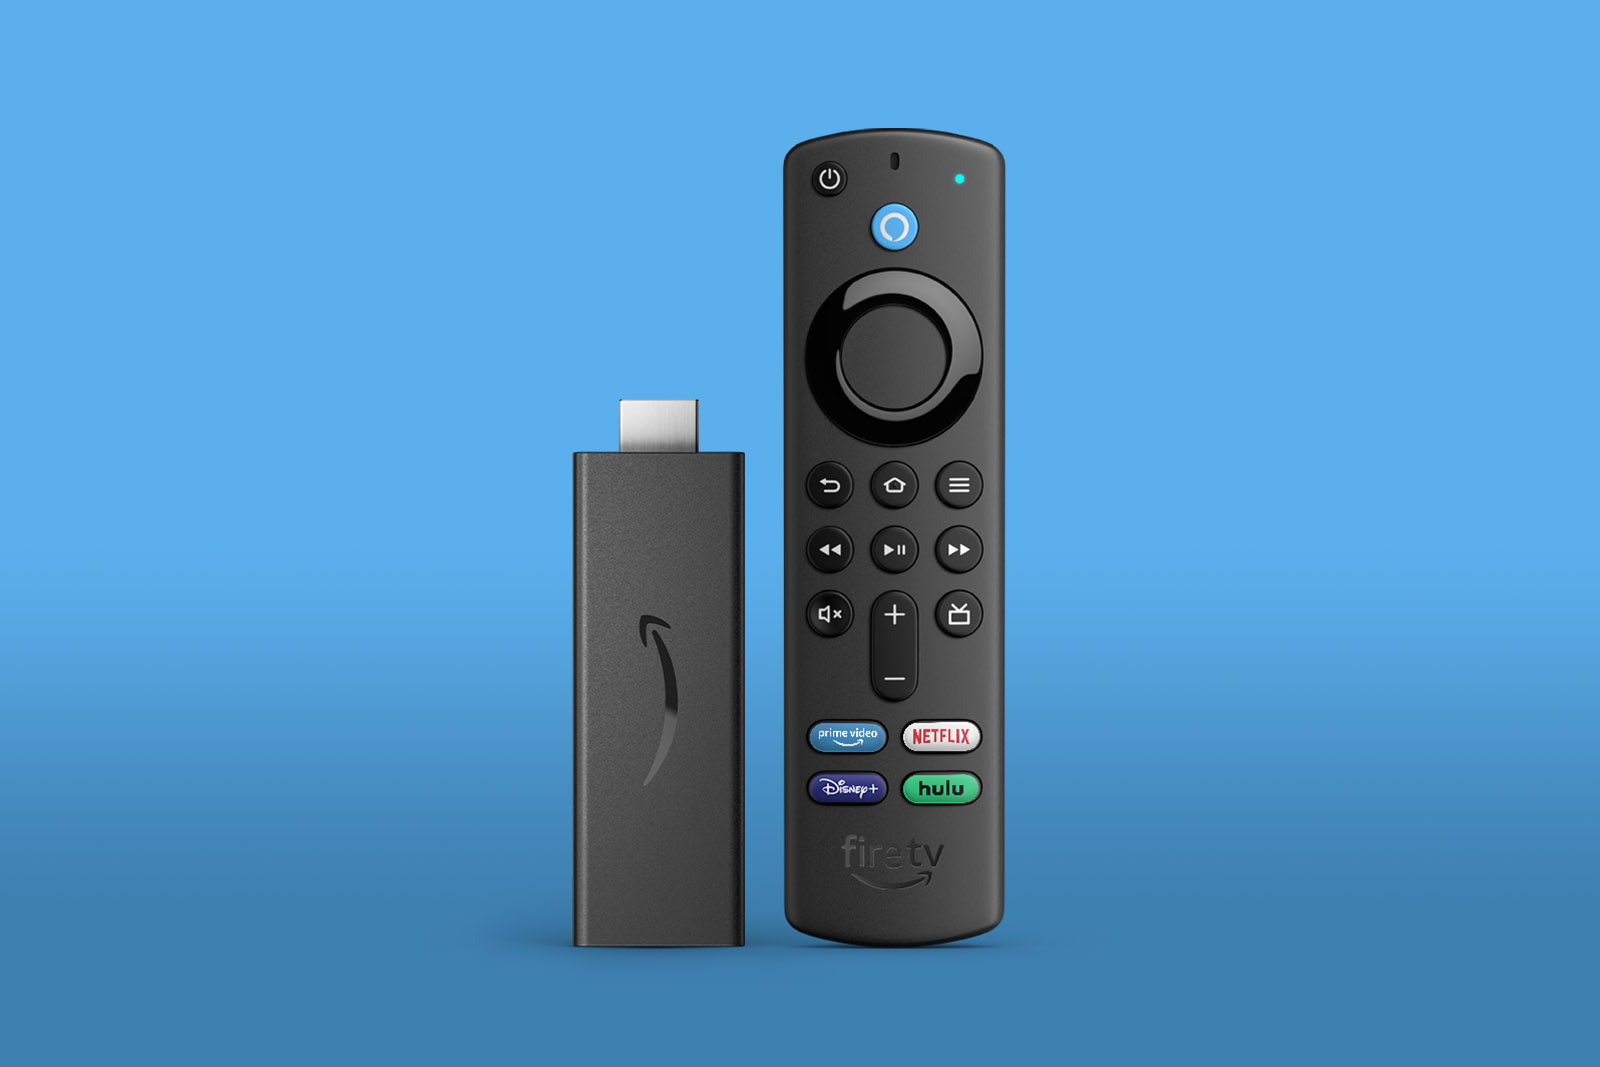 Fire TV Stick 4K review: Ultra High Disclaimers